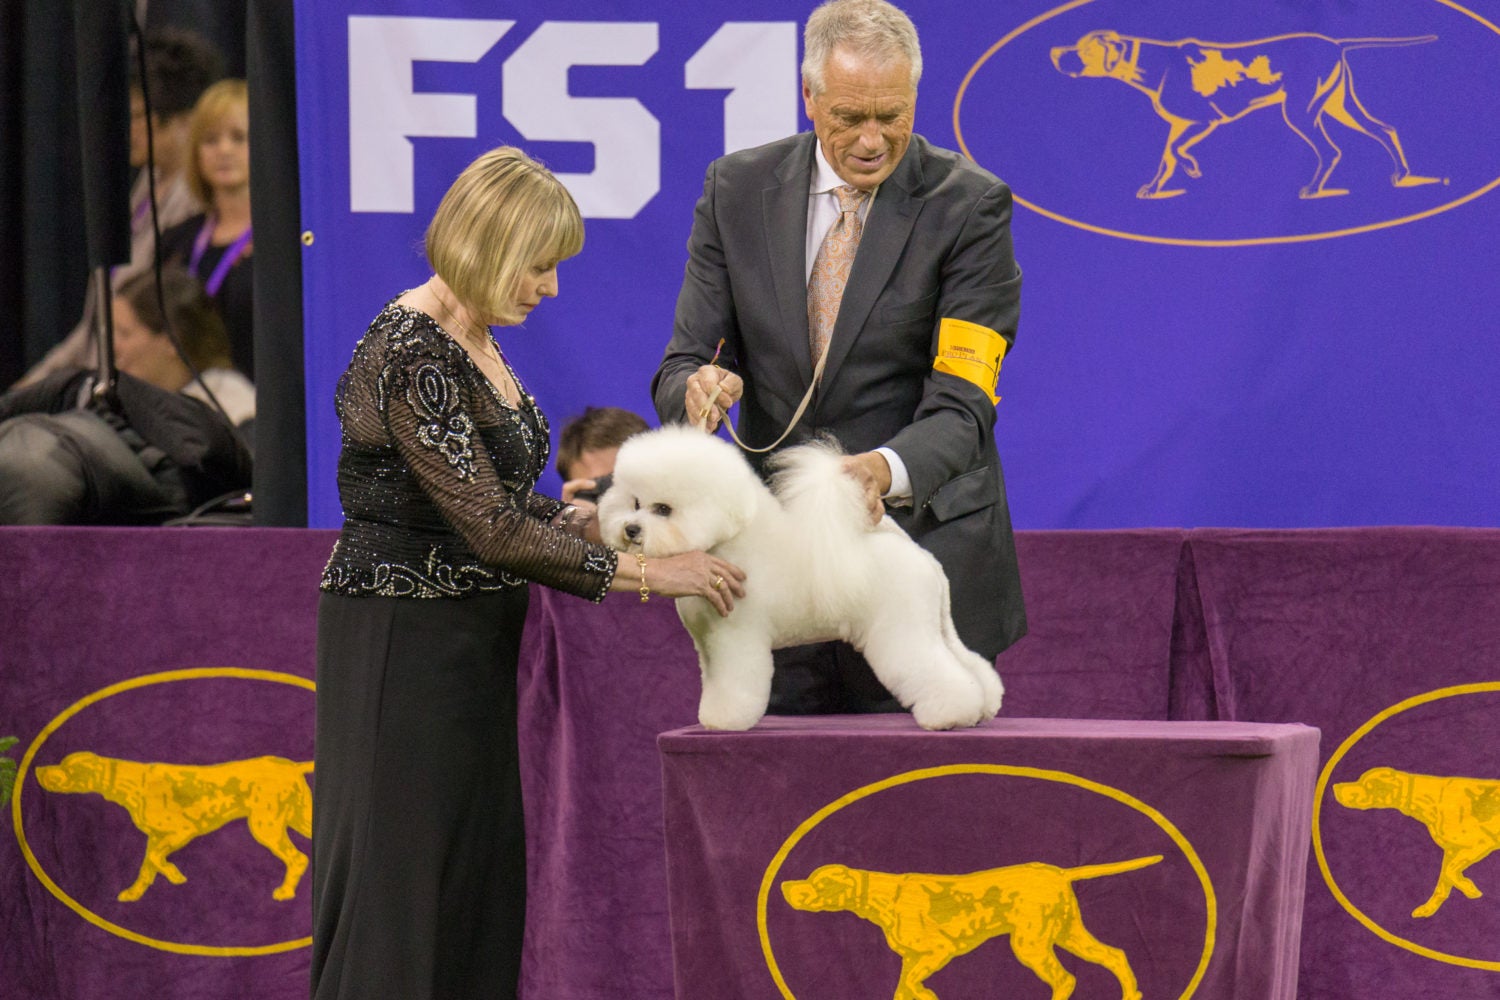 How Much Are Tickets To The Westminster Dog Show